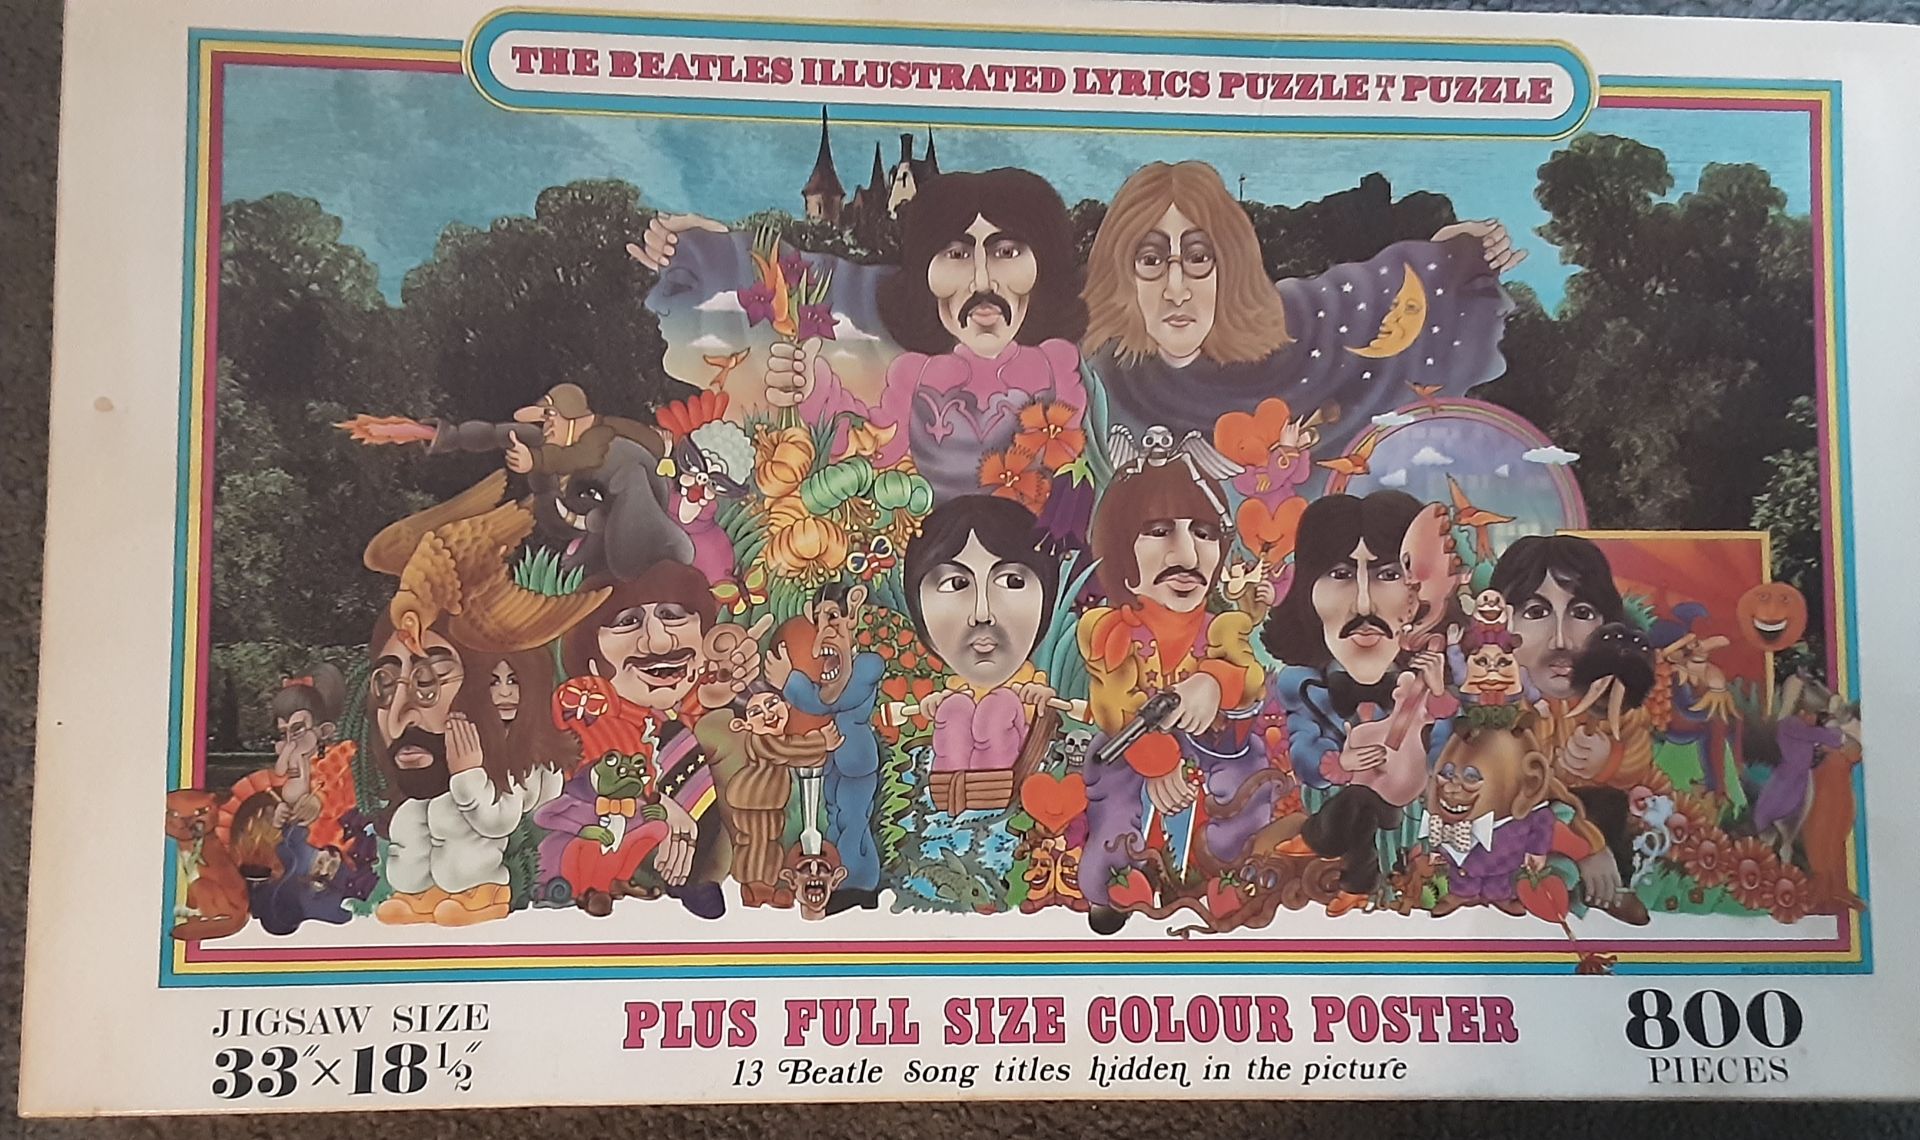 The Beatles illustrated lyrics Puzzle in a Puzzle jigsaw - 800 pieces, - Image 9 of 10